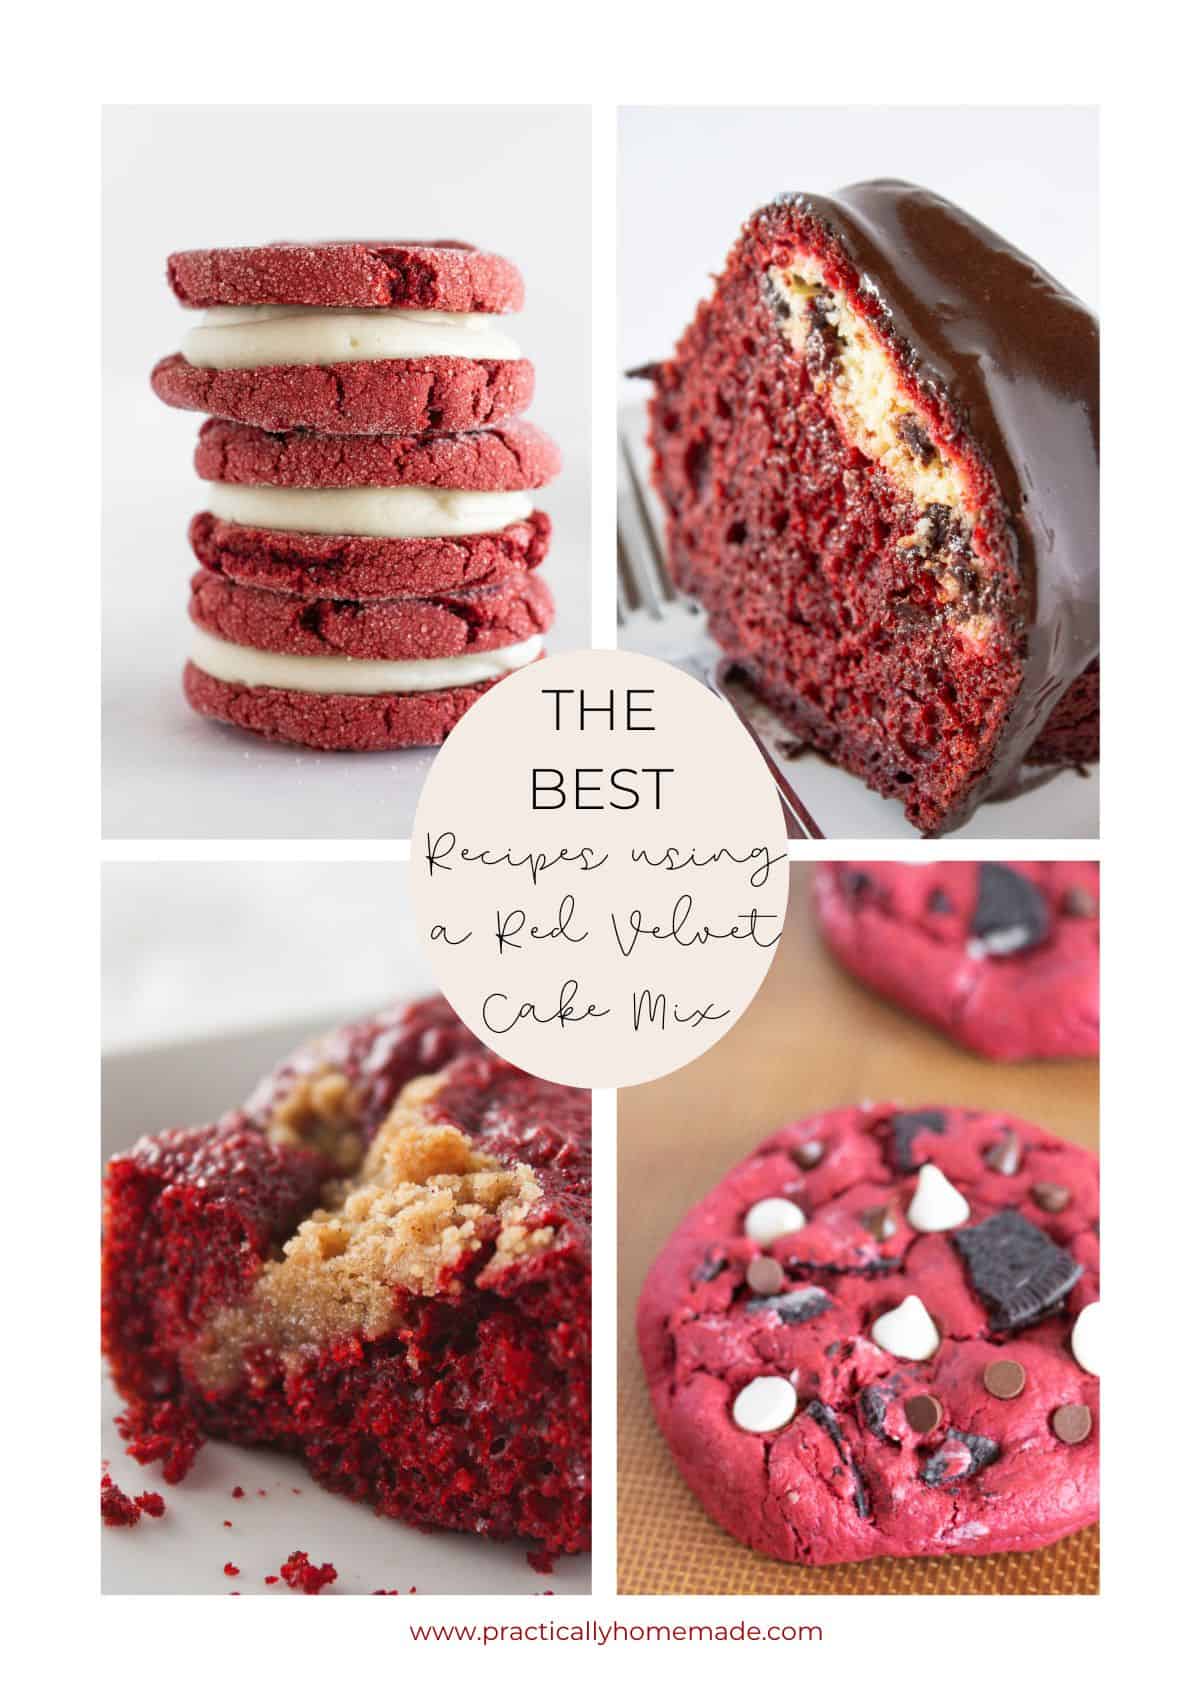 A collage of four different desserts using a red velvet cake mix.